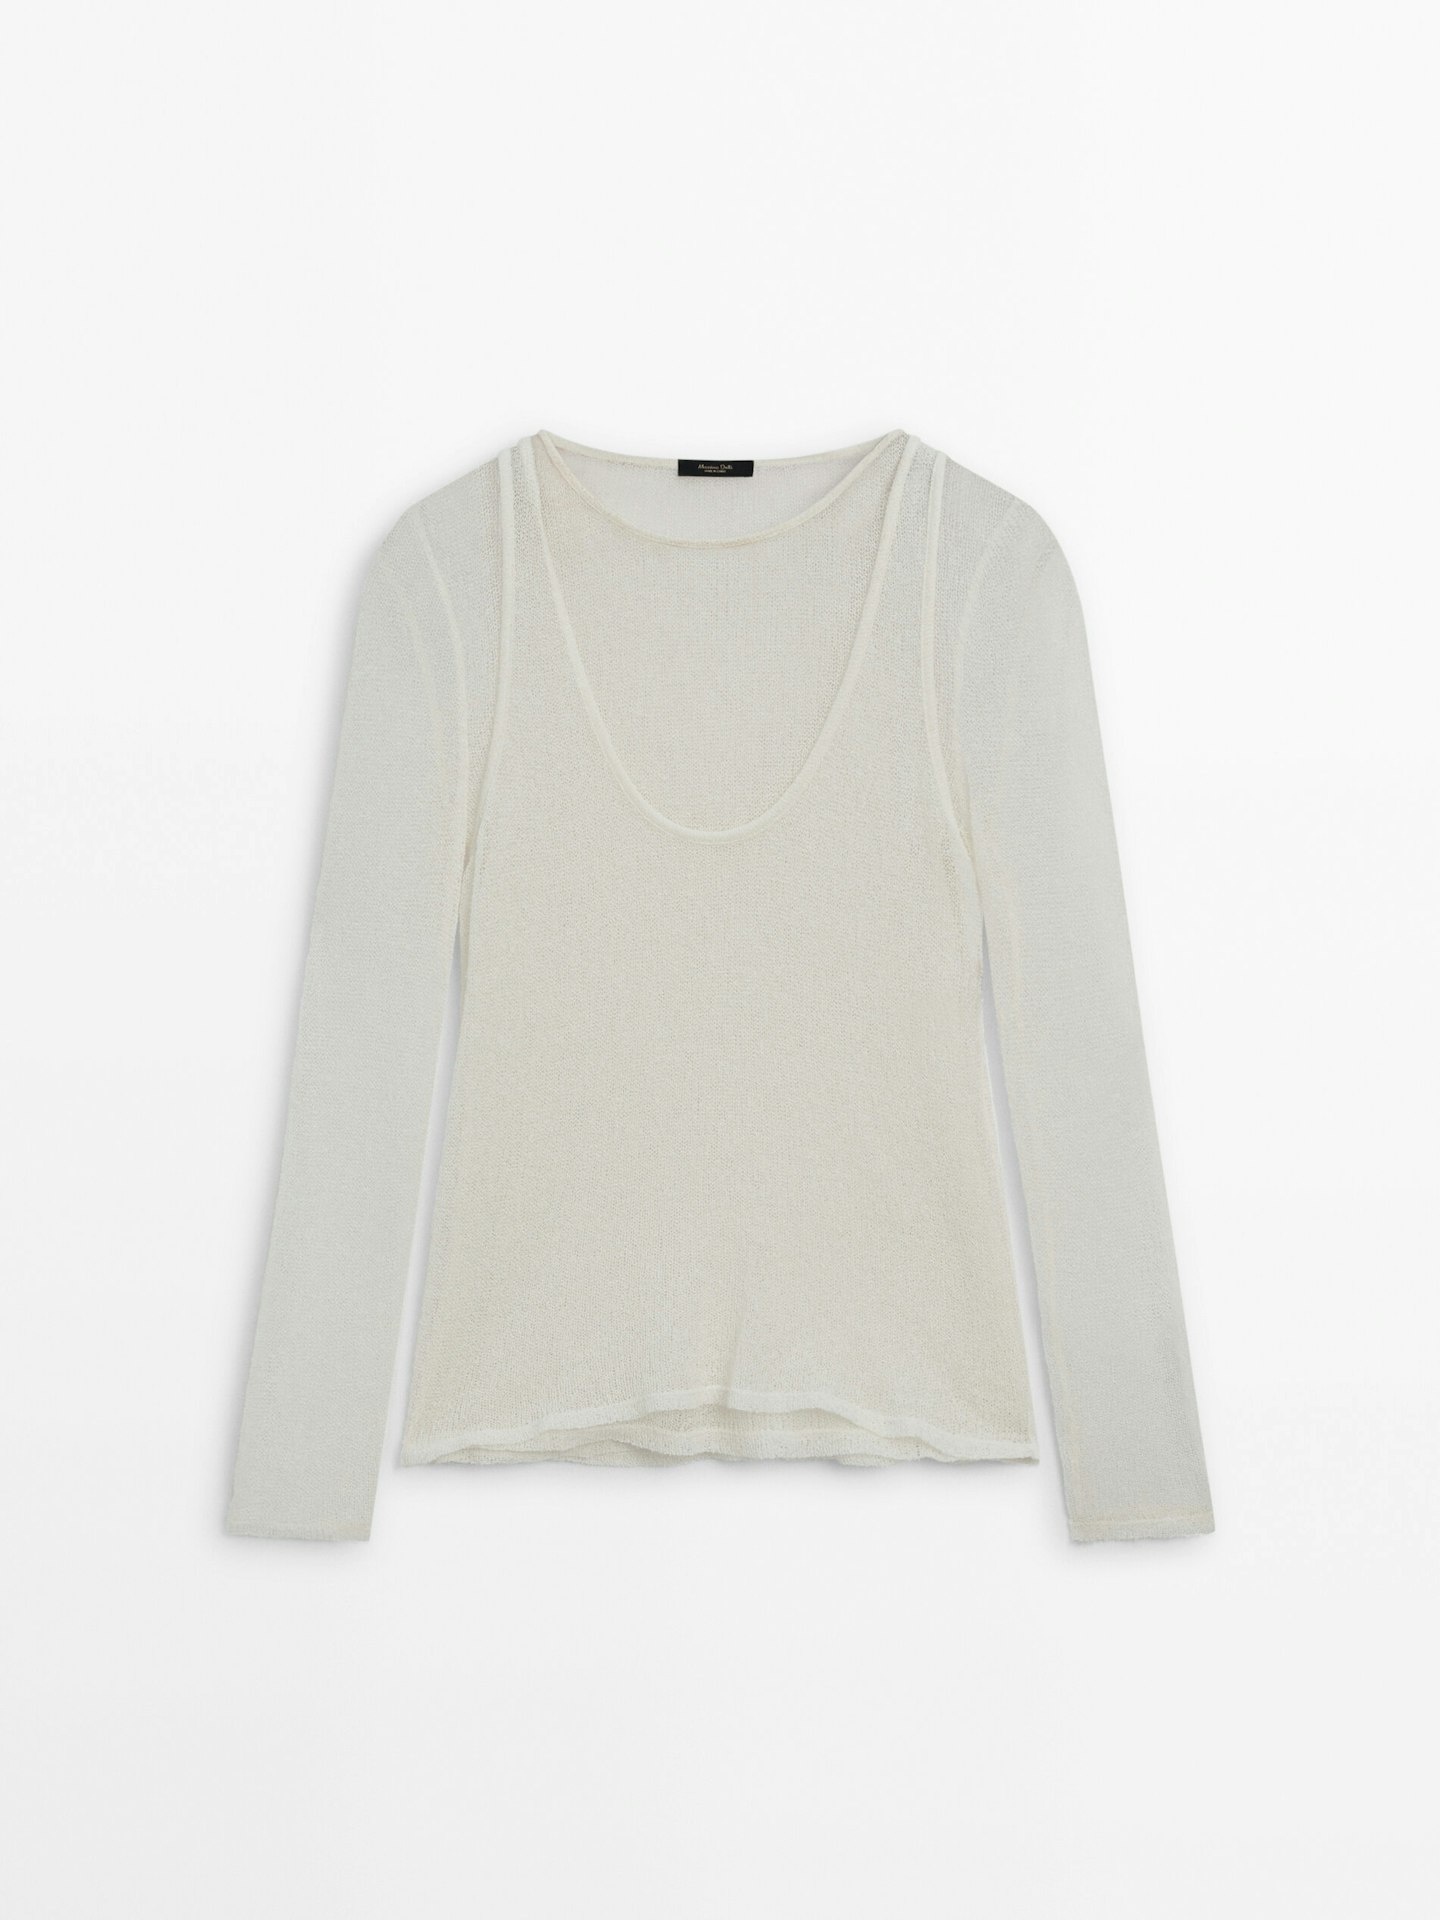 Massimo Dutti, Textured Cotton-Blend Double-Layer Top